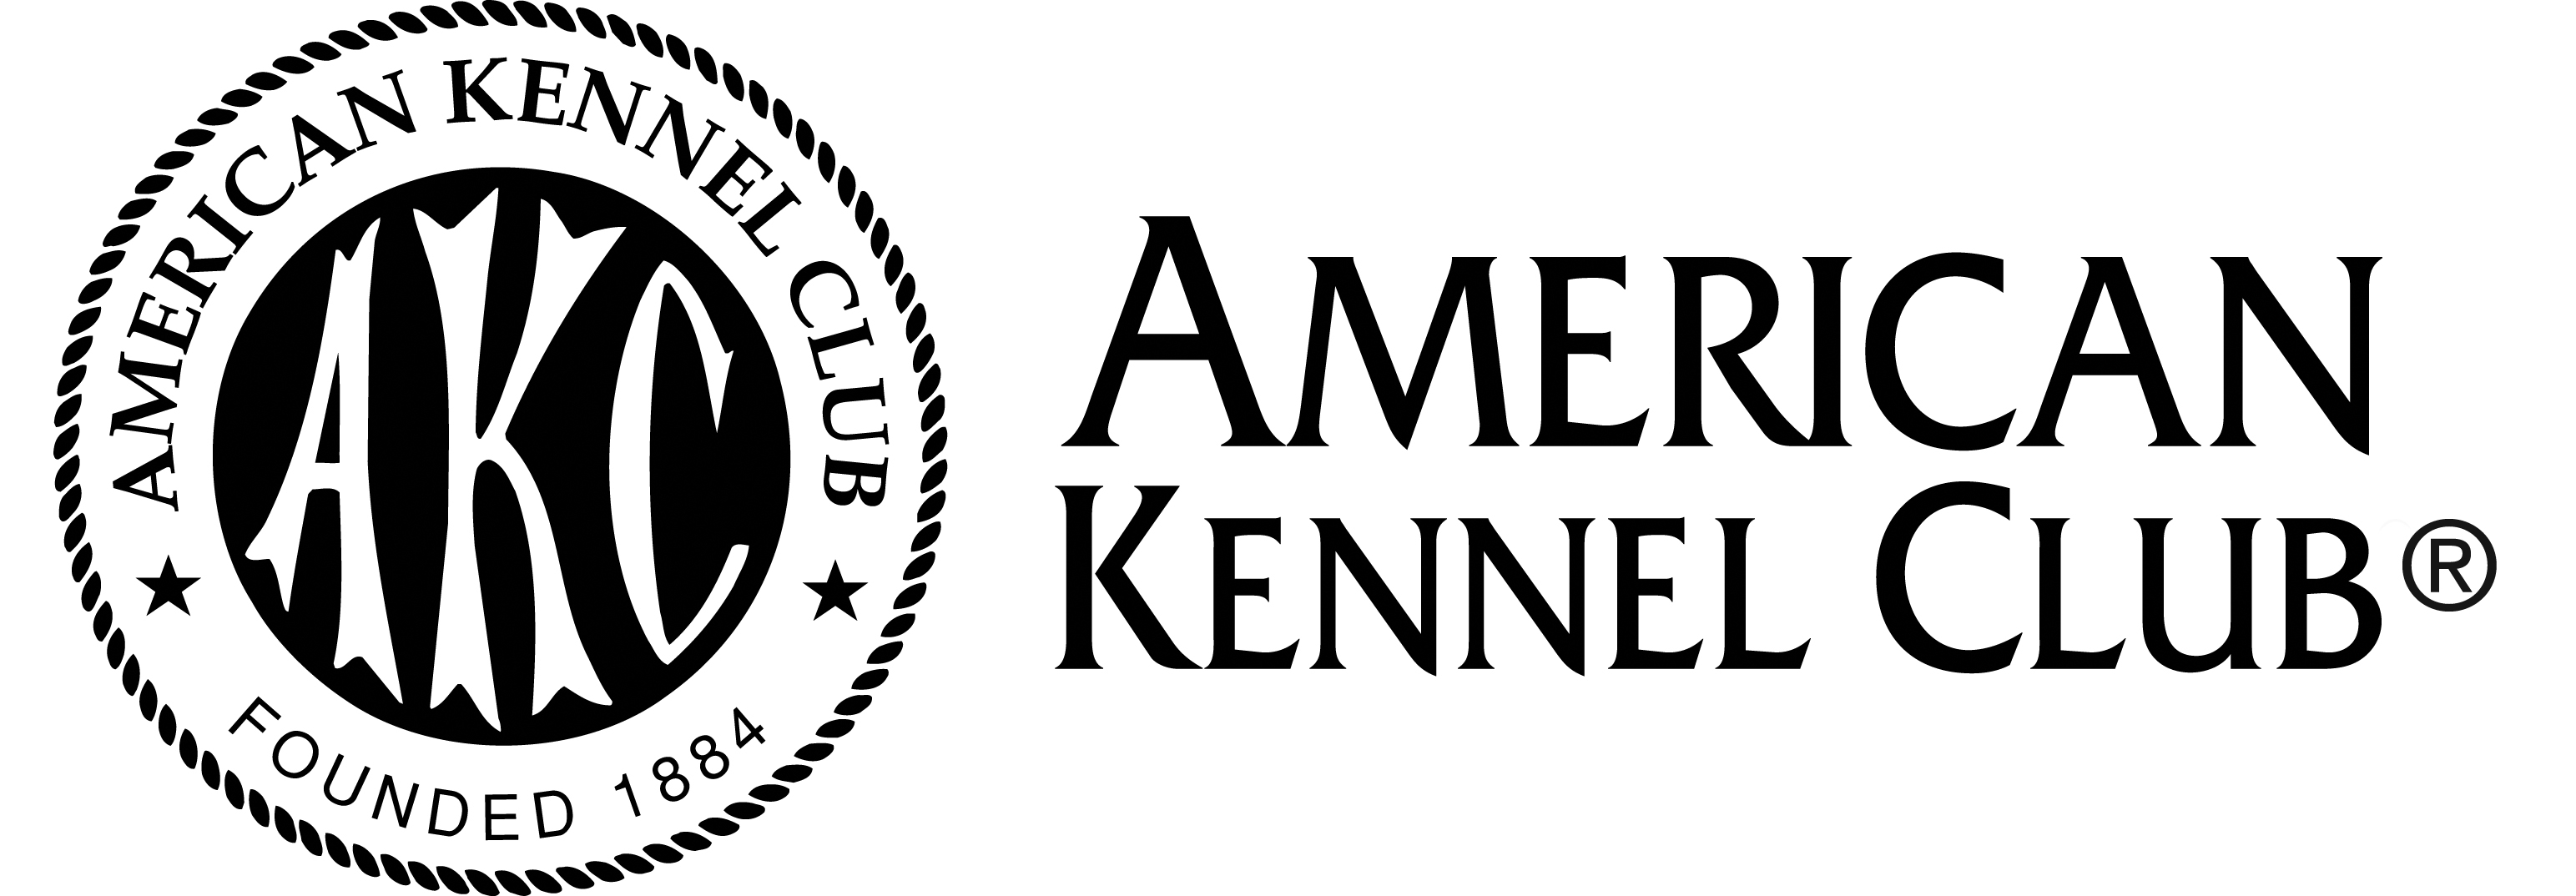 American Kennel Club (AKC), Thursday, October 11, 2018, Press release picture